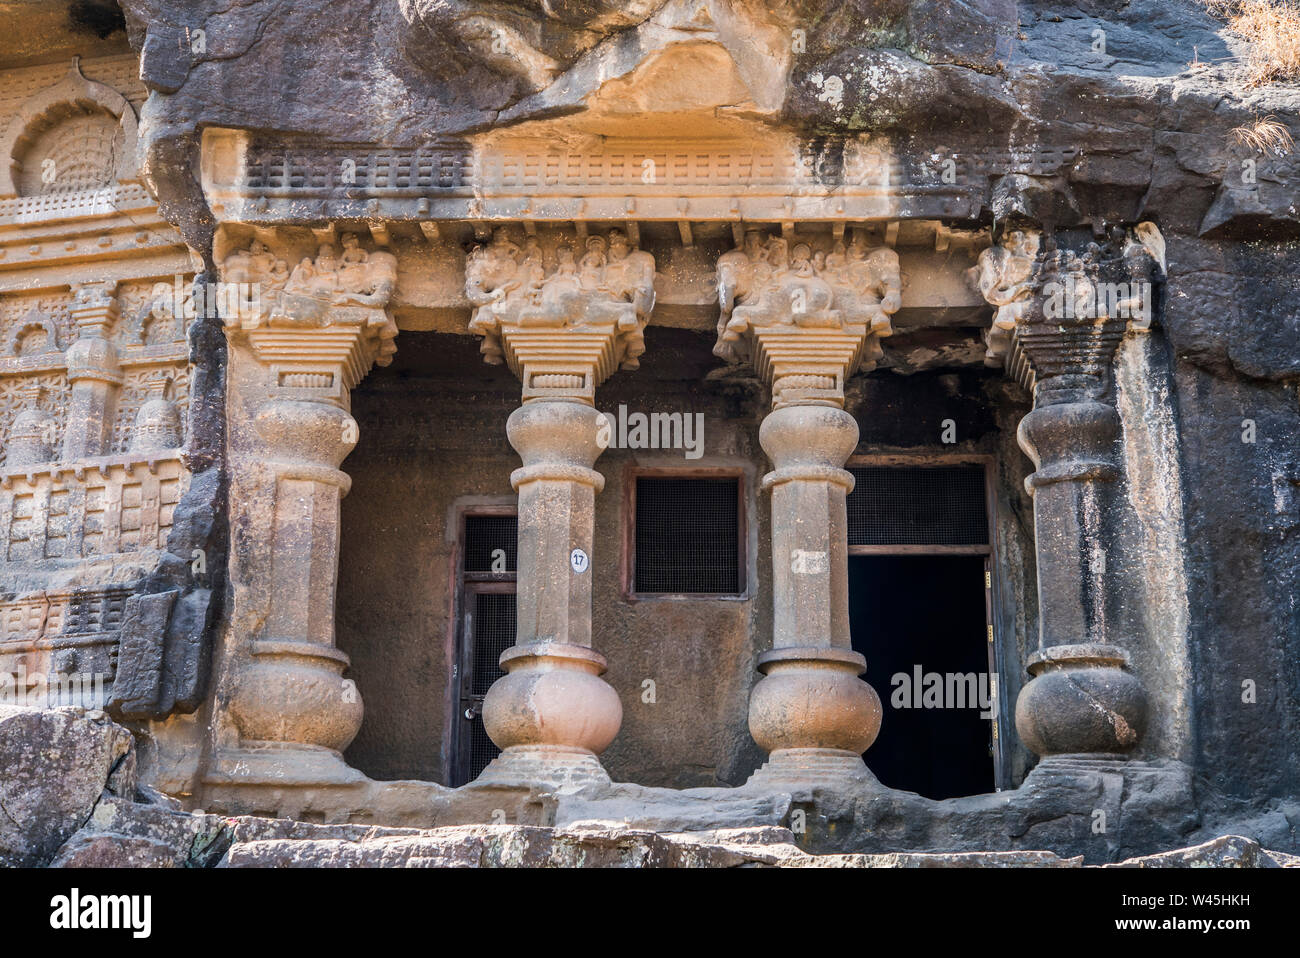 Cave 17, Facade showing two pillars and pilasters with elephant riders, Nasik, Maharashtra. Stock Photo